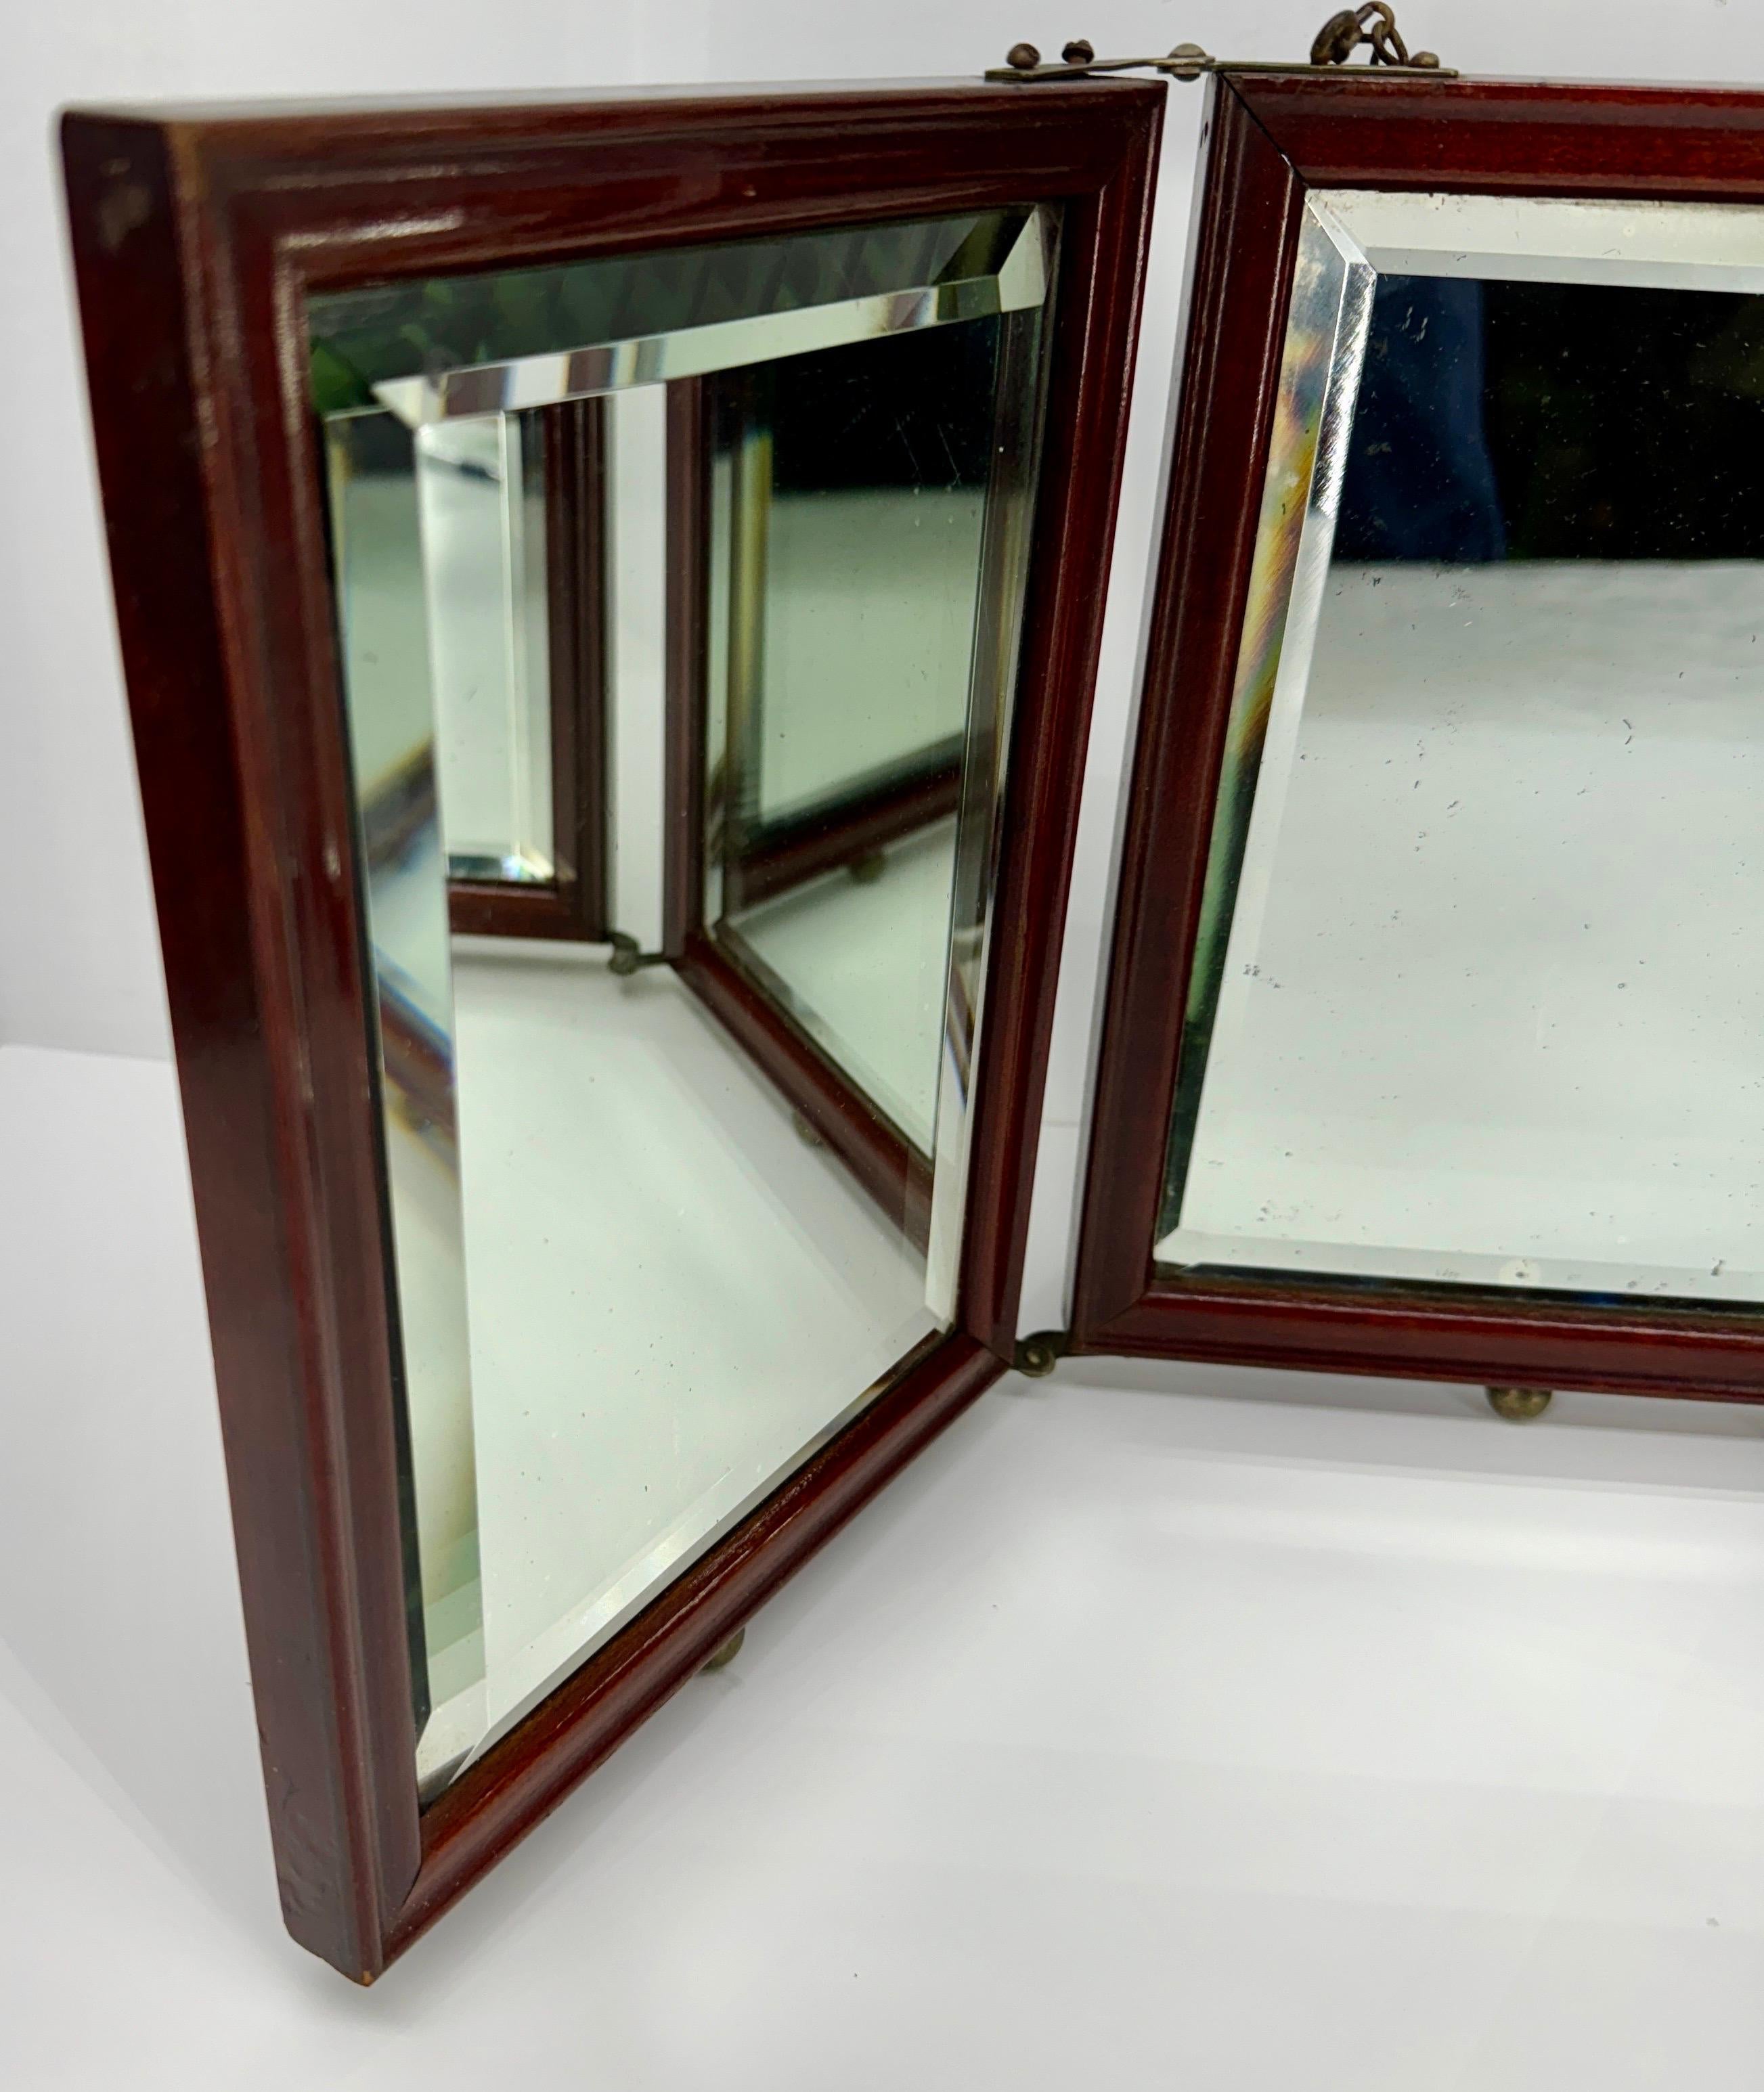 British Tri-Fold Travel Vanity Or Dresser Mirror With Beveled Glass For Sale